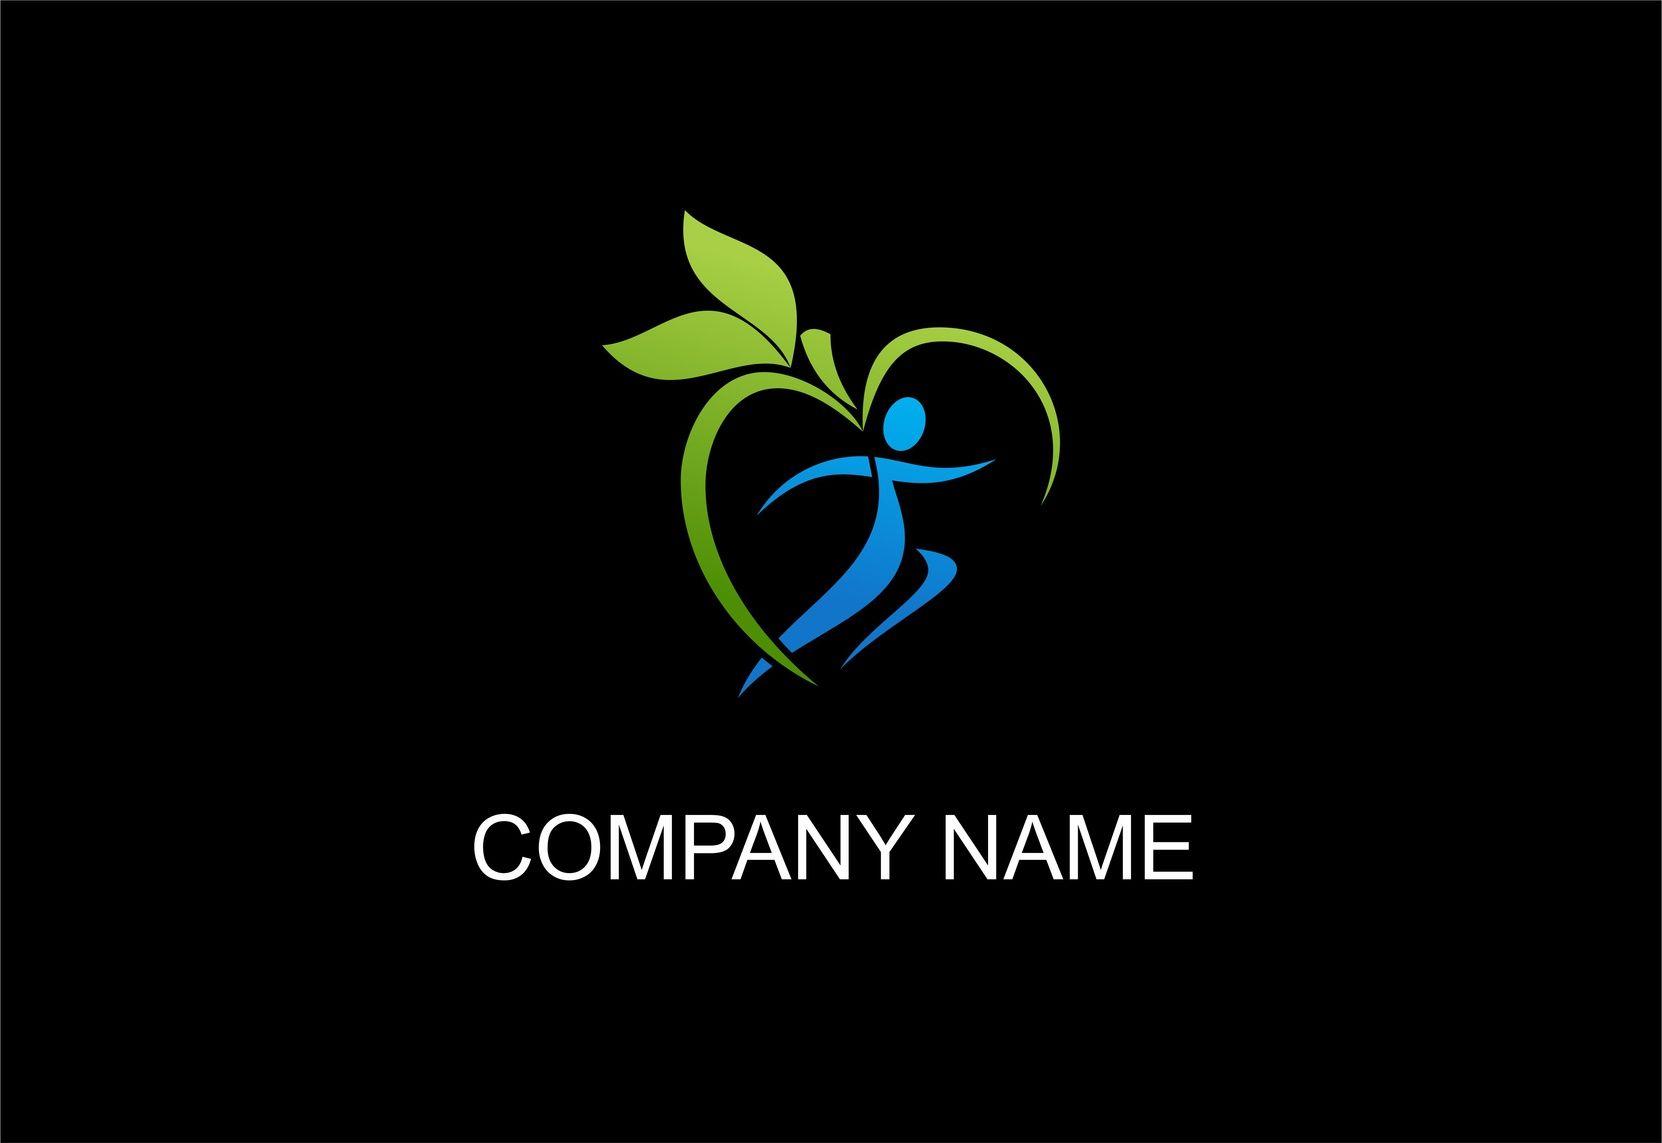 Nutritionist Logo - Branding Your Health Business With a Stunning Nutritionist Logo ...